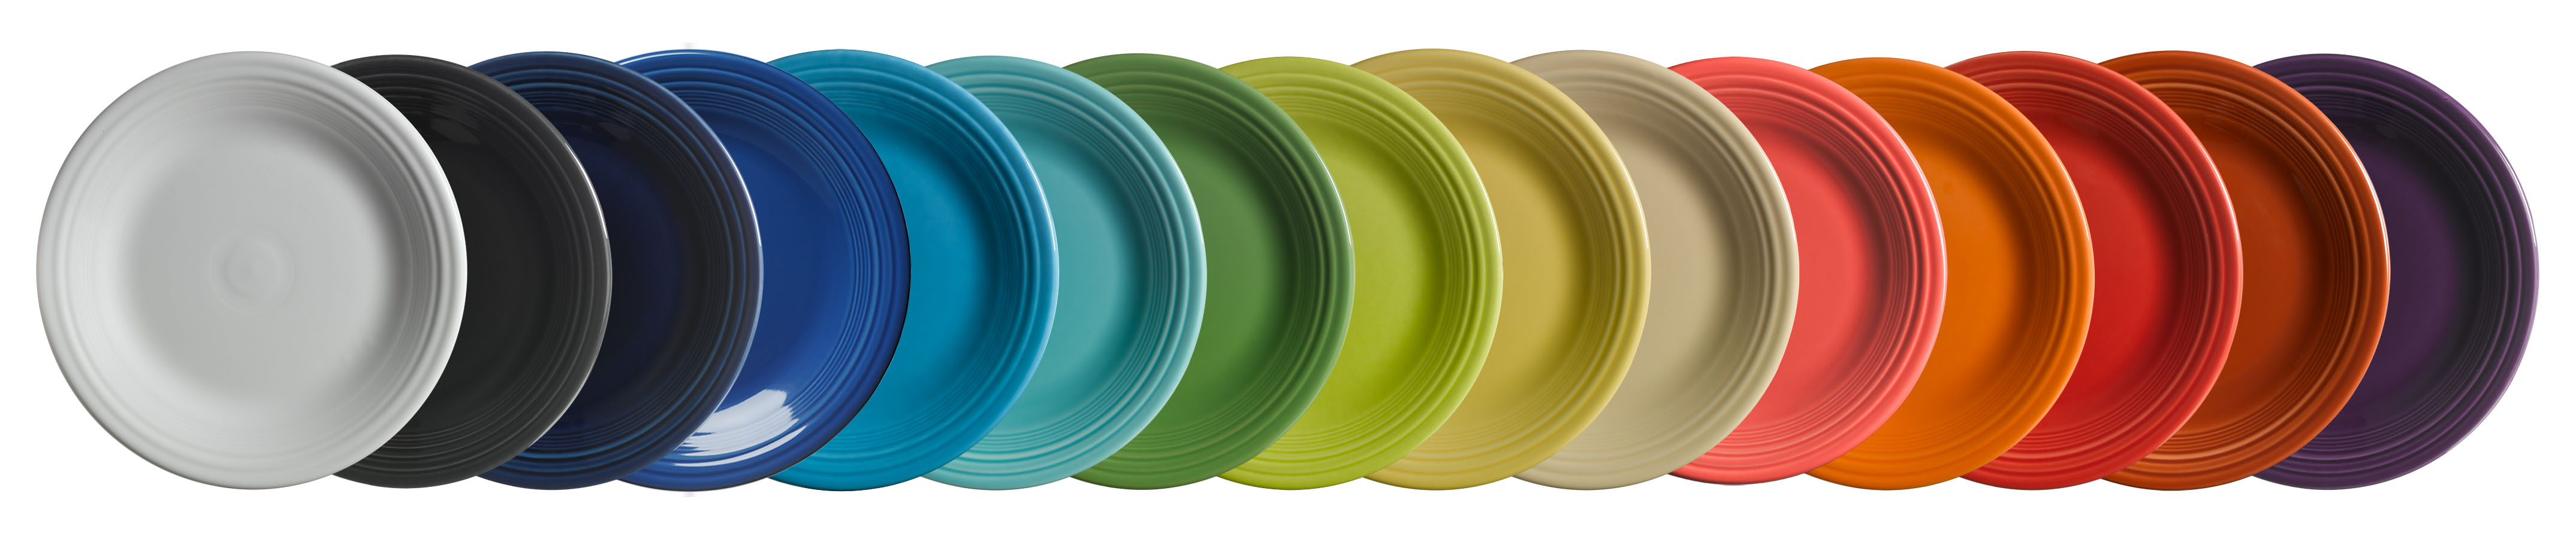 Plates Made in USA